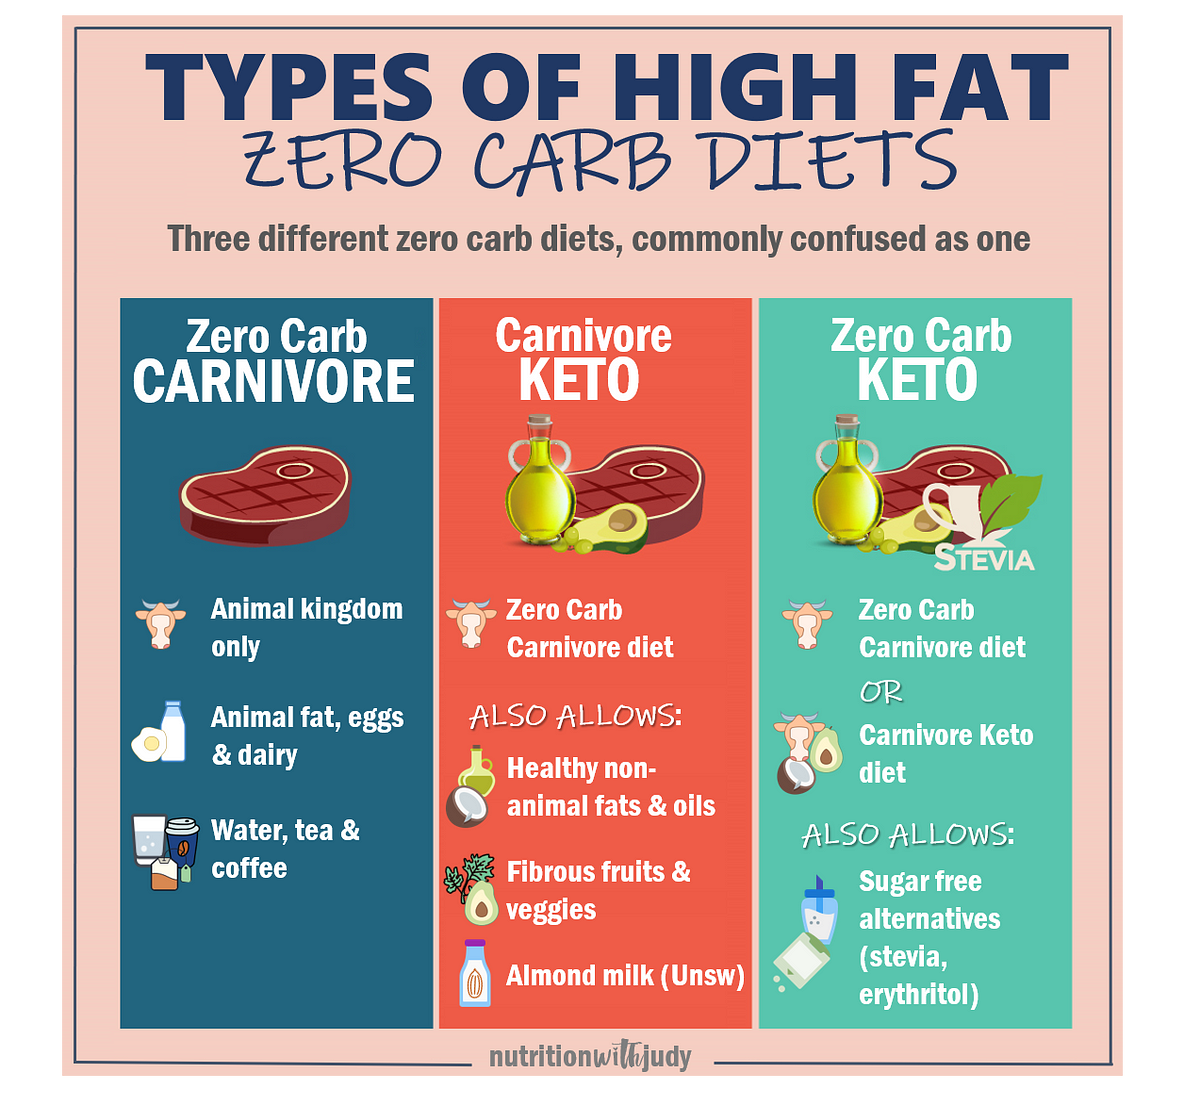 Carnivore Diet for Beginners — How to Start the Zero-Carbohydrate Carnivore Diet